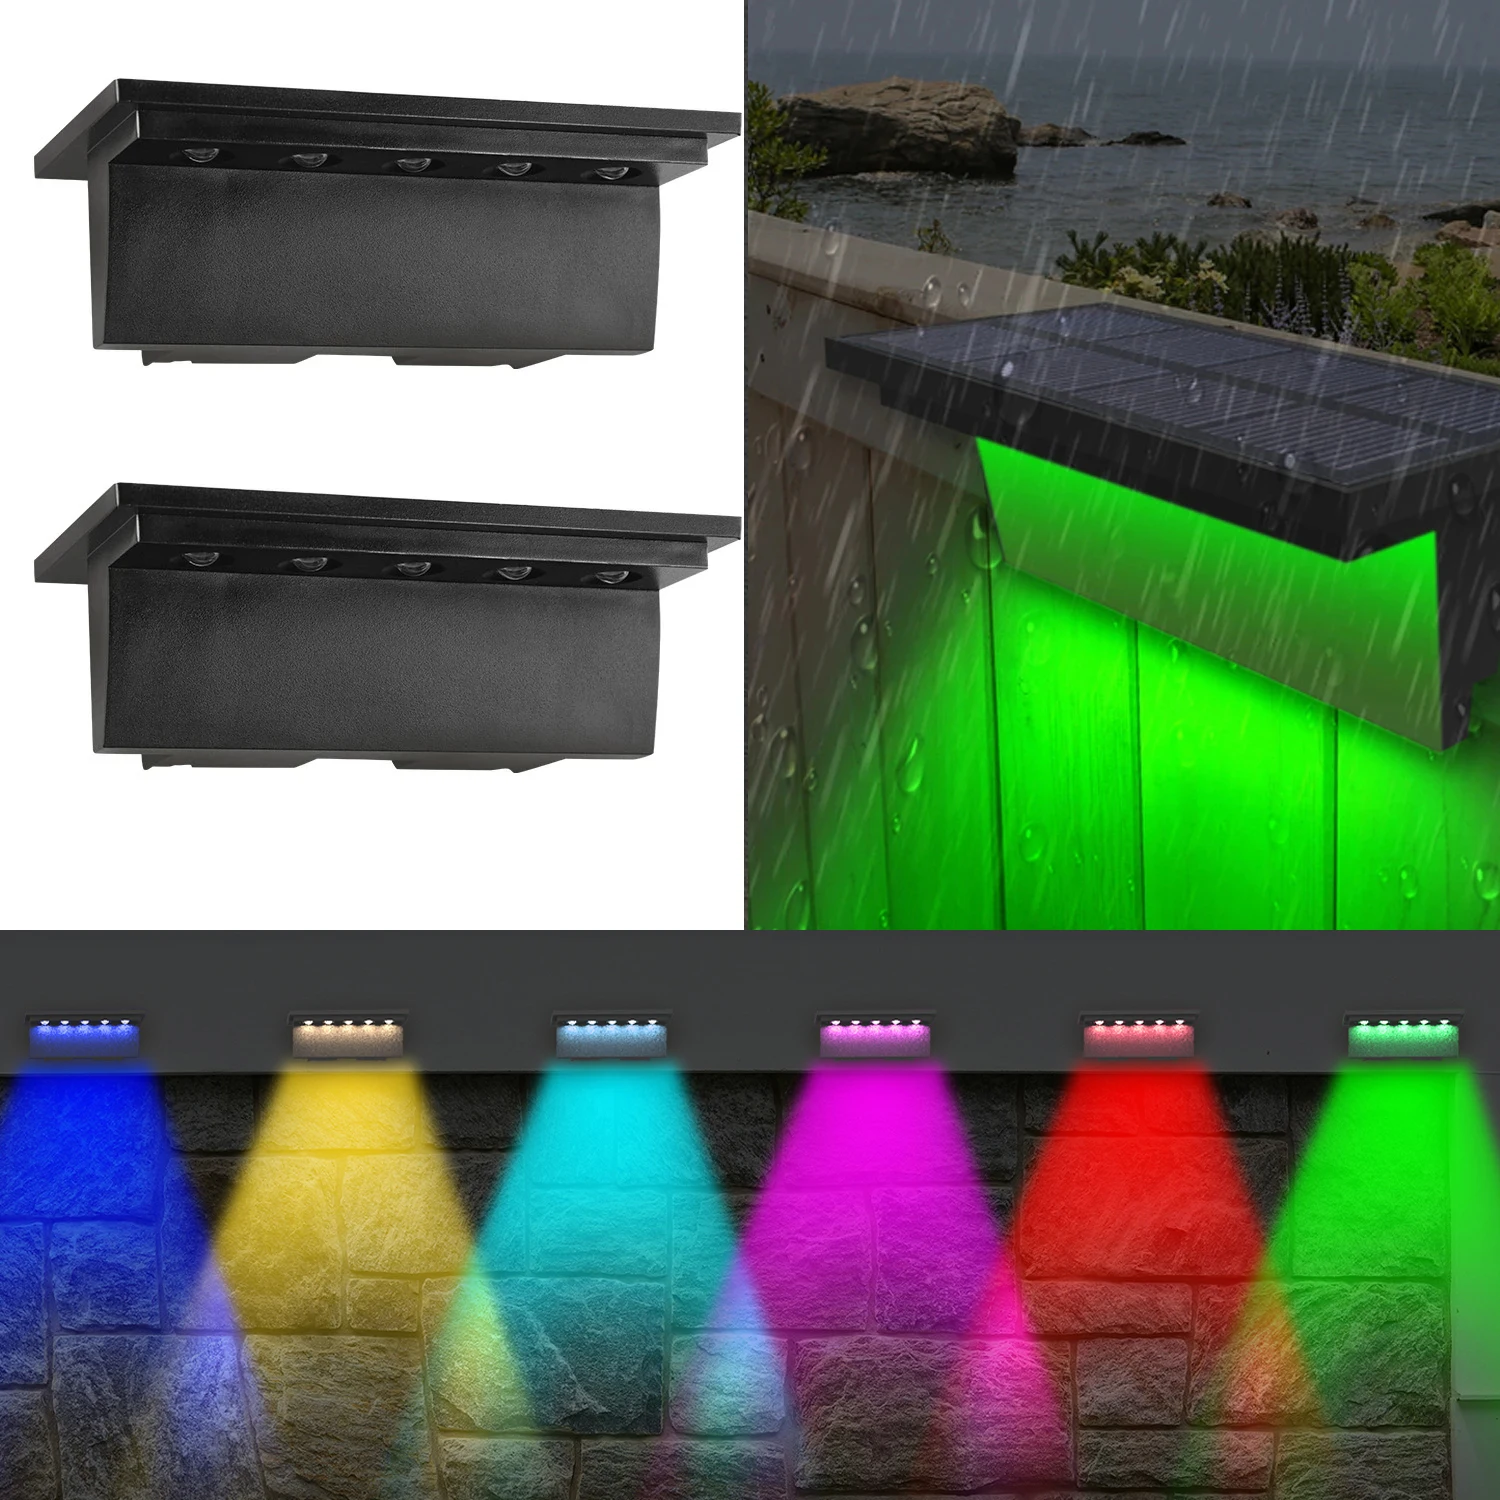 Solar Deck Lights Outdoor Stairs Fence Yard Patio Step Lamp Waterproof Led RGB Garden Terrace Guardrail Pathway Solar Light 1pc plant stand shelves balcony flower pot rack hanging guardrail succulent flower railing shelf display shelving unit for patio